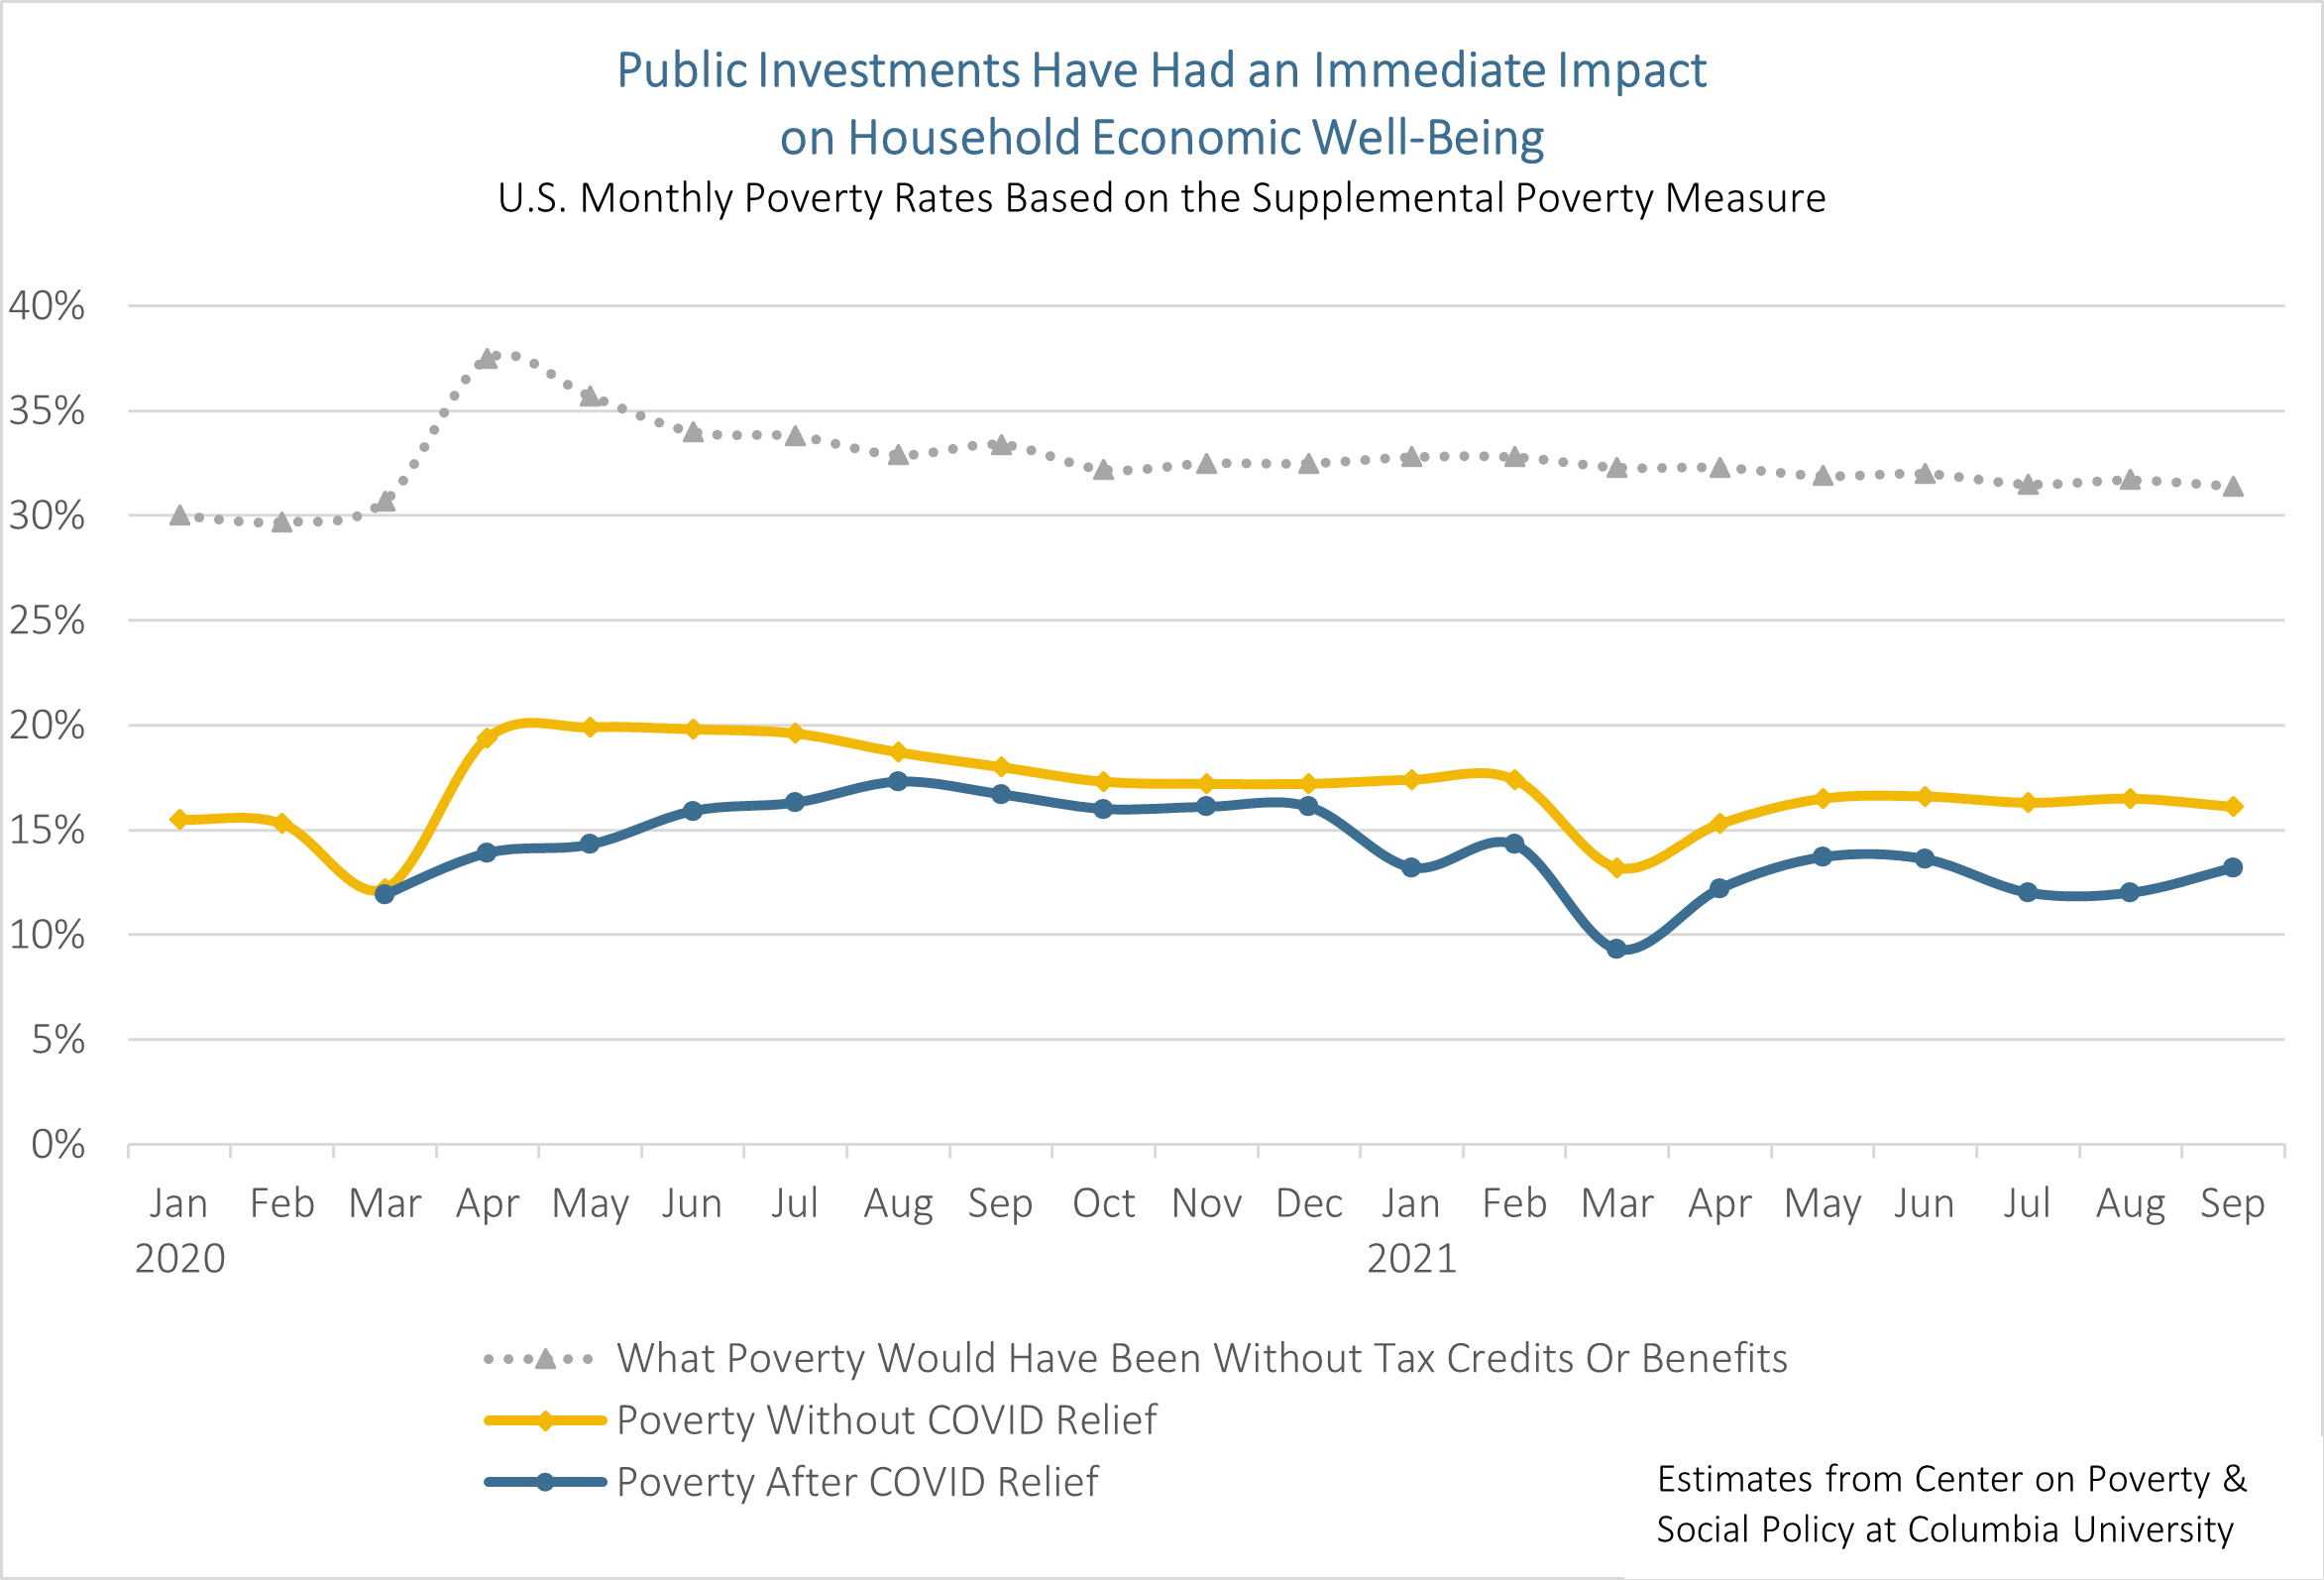 Line chart: Public Investments Have Had an Immediate Impact on Household Economic Well-Being - US Monthly Poverty Rates Based on the Supplemental Poverty Measure